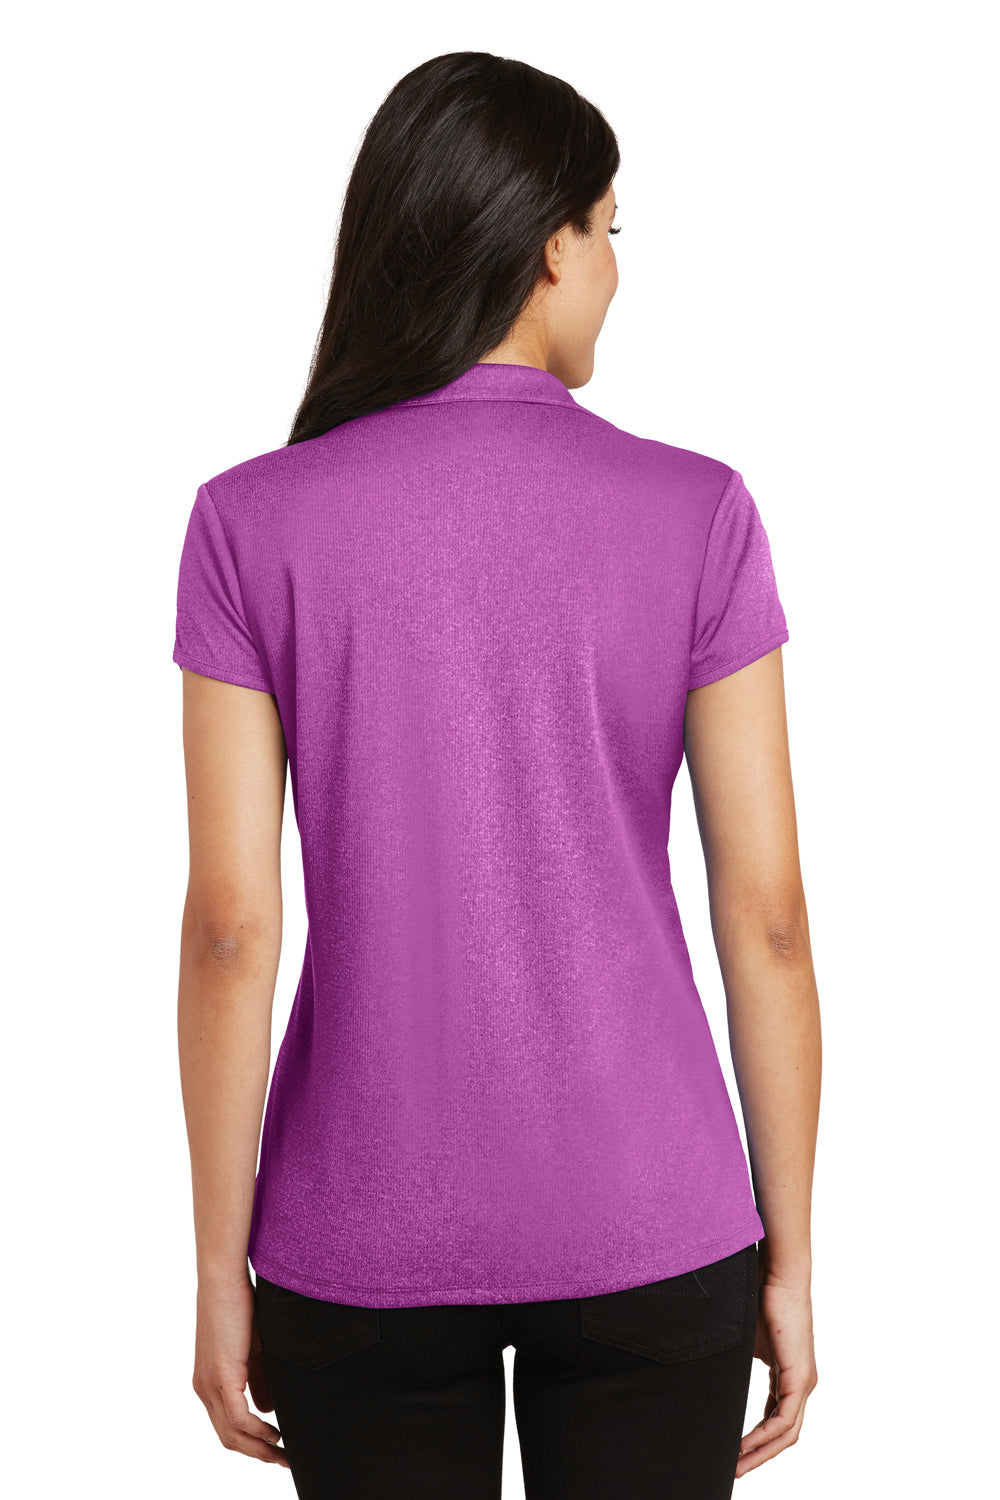 Port Authority L576 Womens Trace Moisture Wicking Short Sleeve Polo Shirt Heather Berry Pink Back